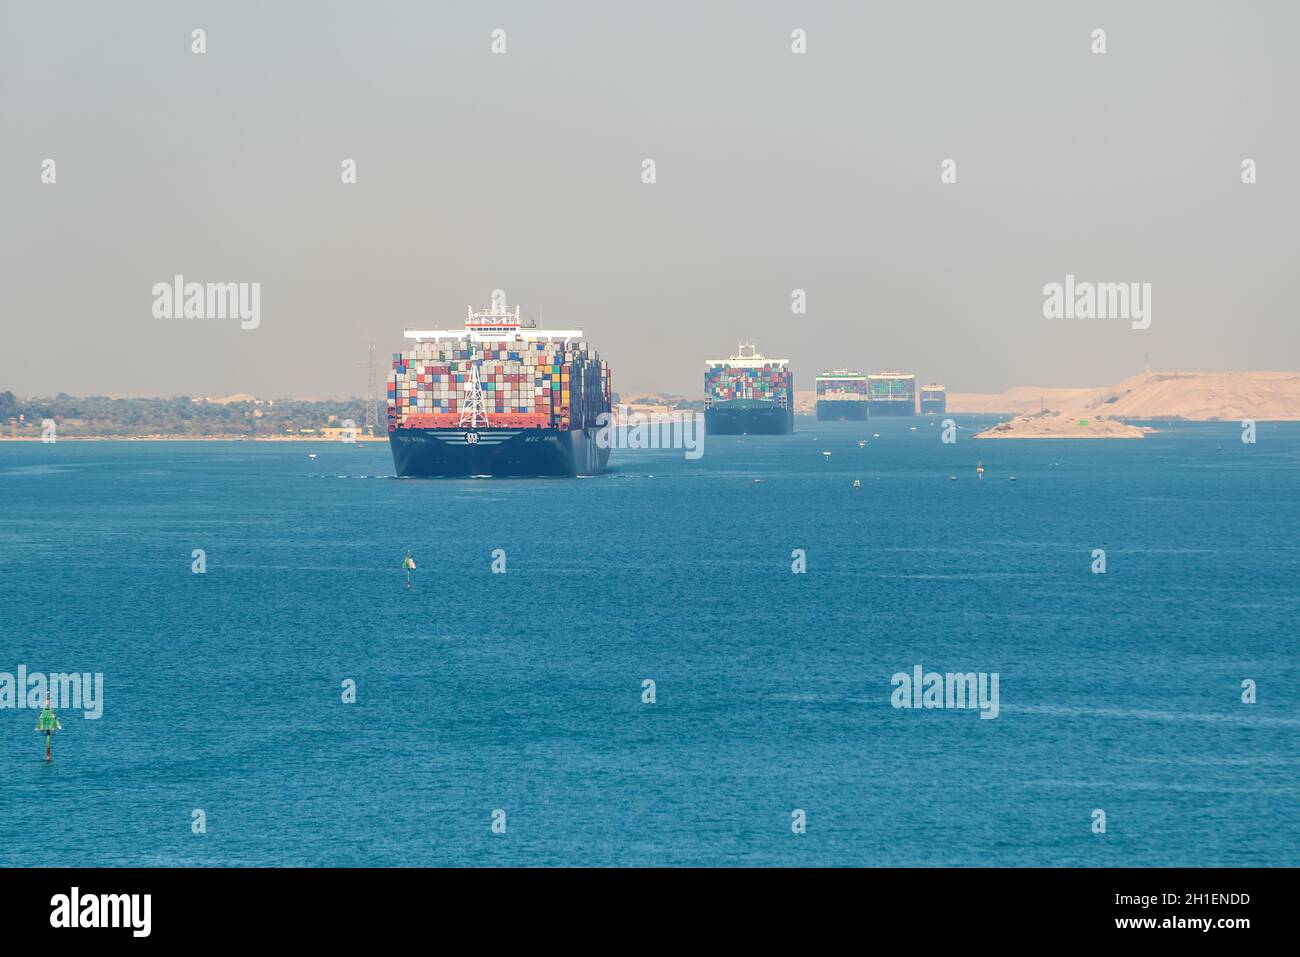 Suez, Egypt - November 5, 2017: Large container vessels (ship) passing Suez Canal in the sandy haze in Egypt. Stock Photo